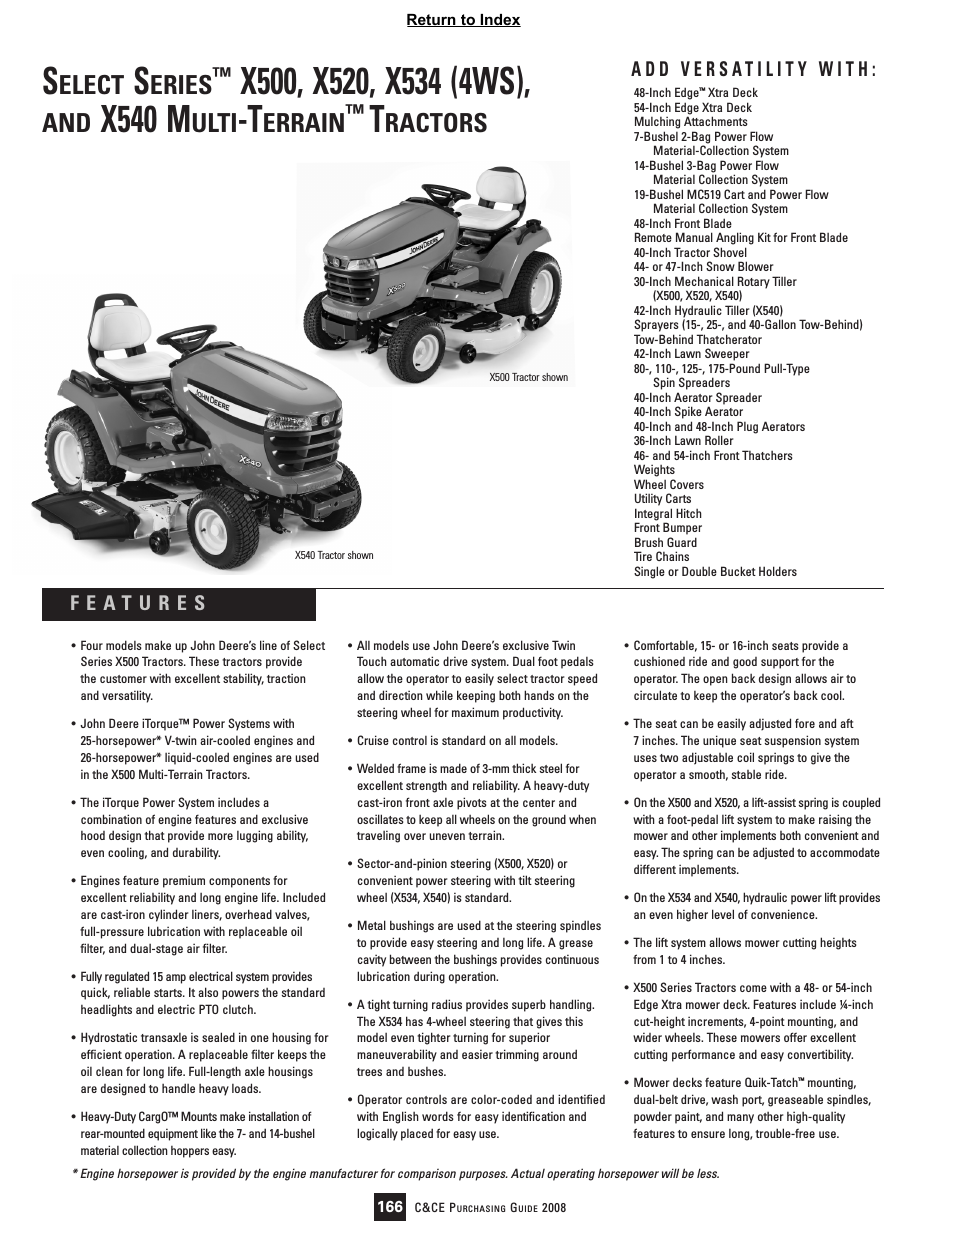 Select Series X520 (Page 1)